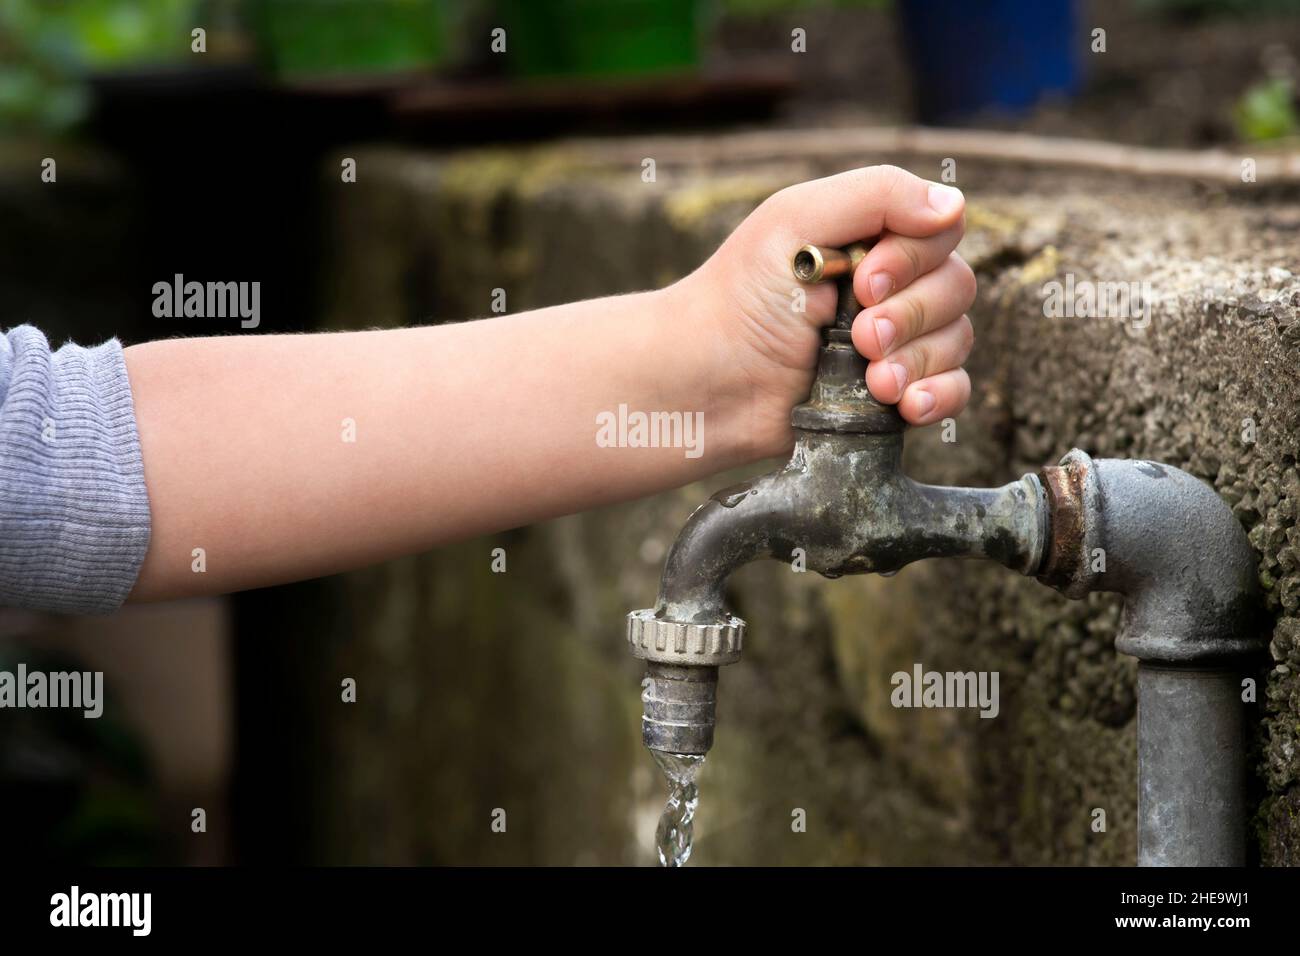 Hand from a child is turning tap water valve and letting water out. Stock Photo